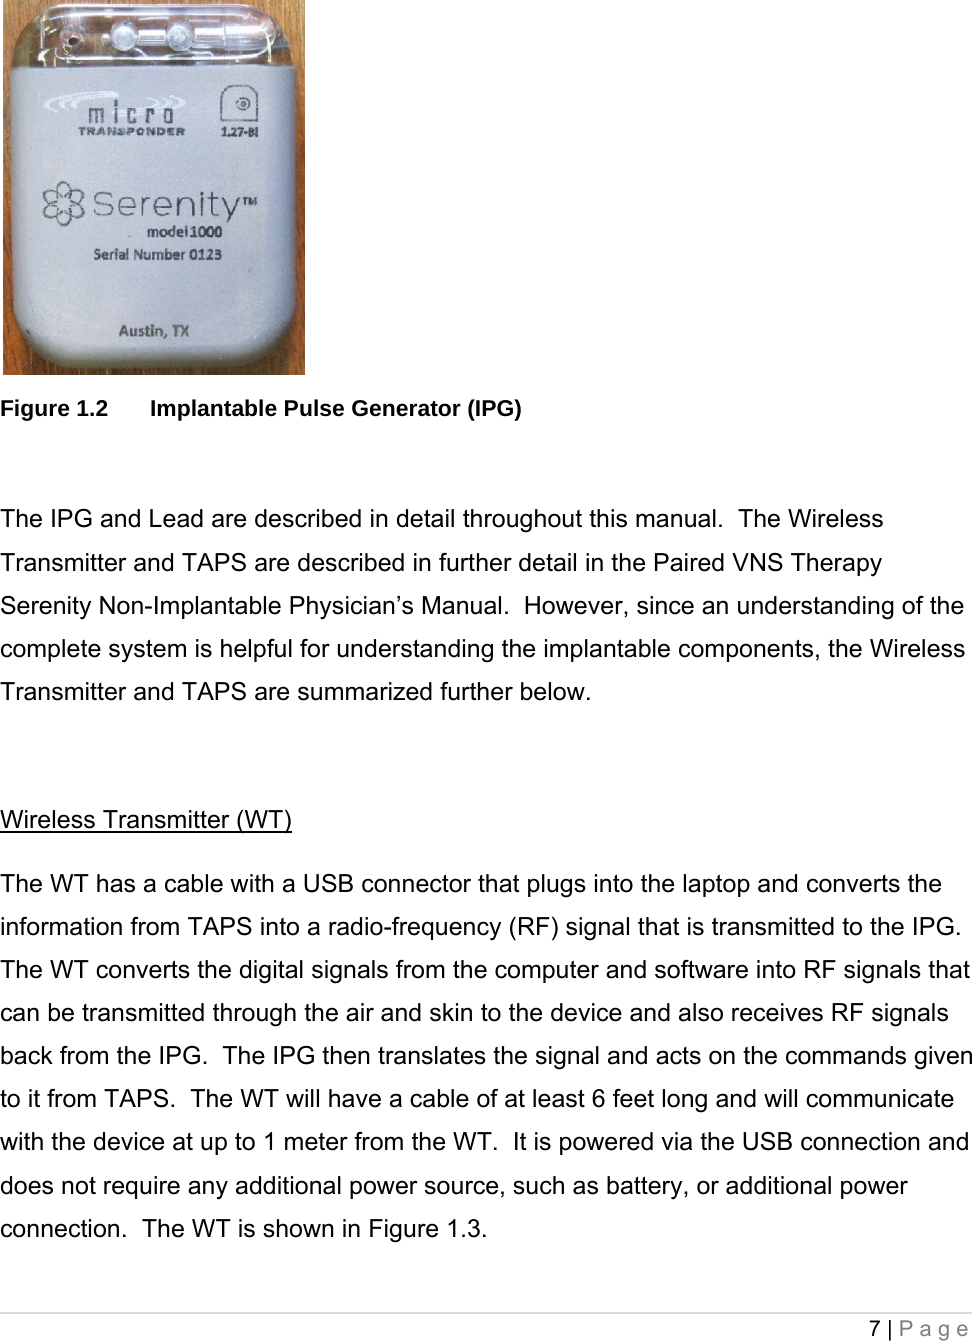 7 | Page      Figure 1.2  Implantable Pulse Generator (IPG)  The IPG and Lead are described in detail throughout this manual.  The Wireless Transmitter and TAPS are described in further detail in the Paired VNS Therapy Serenity Non-Implantable Physician’s Manual.  However, since an understanding of the complete system is helpful for understanding the implantable components, the Wireless Transmitter and TAPS are summarized further below.   Wireless Transmitter (WT) The WT has a cable with a USB connector that plugs into the laptop and converts the information from TAPS into a radio-frequency (RF) signal that is transmitted to the IPG.  The WT converts the digital signals from the computer and software into RF signals that can be transmitted through the air and skin to the device and also receives RF signals back from the IPG.  The IPG then translates the signal and acts on the commands given to it from TAPS.  The WT will have a cable of at least 6 feet long and will communicate with the device at up to 1 meter from the WT.  It is powered via the USB connection and does not require any additional power source, such as battery, or additional power connection.  The WT is shown in Figure 1.3.  